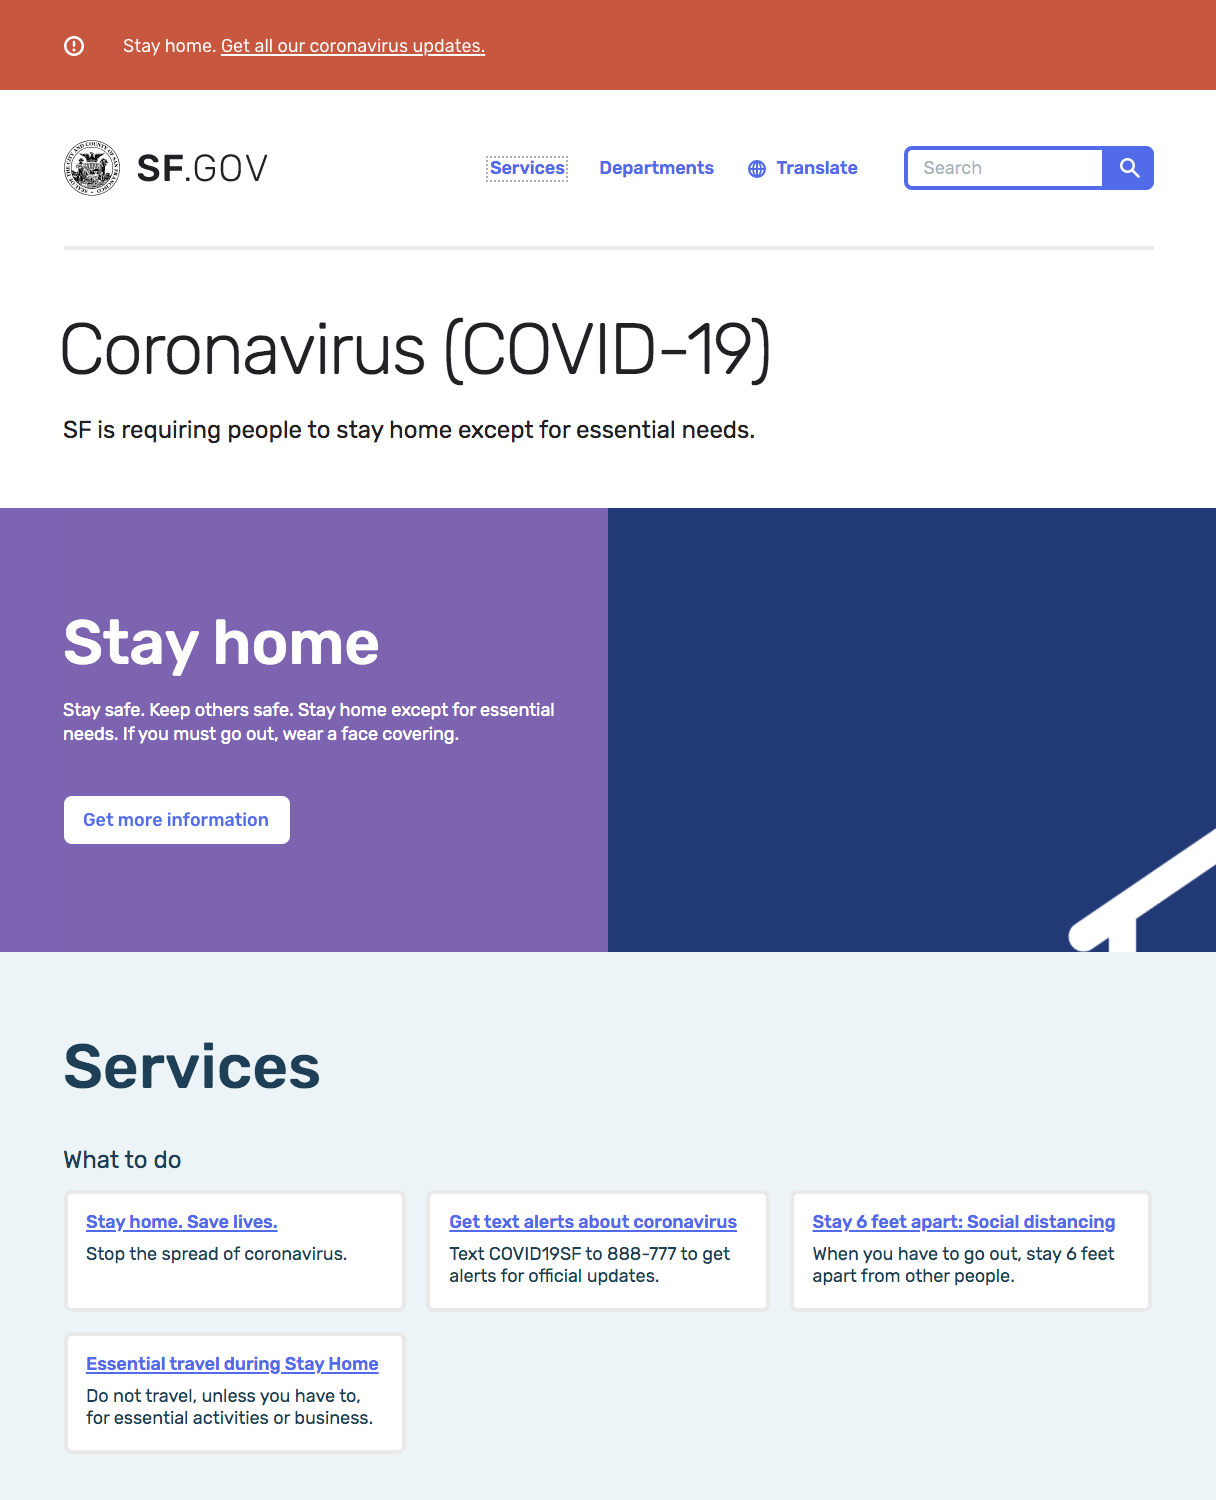 The San Francisco government designed a landing page and information portal specific to the Covid-19 Coronavirus.